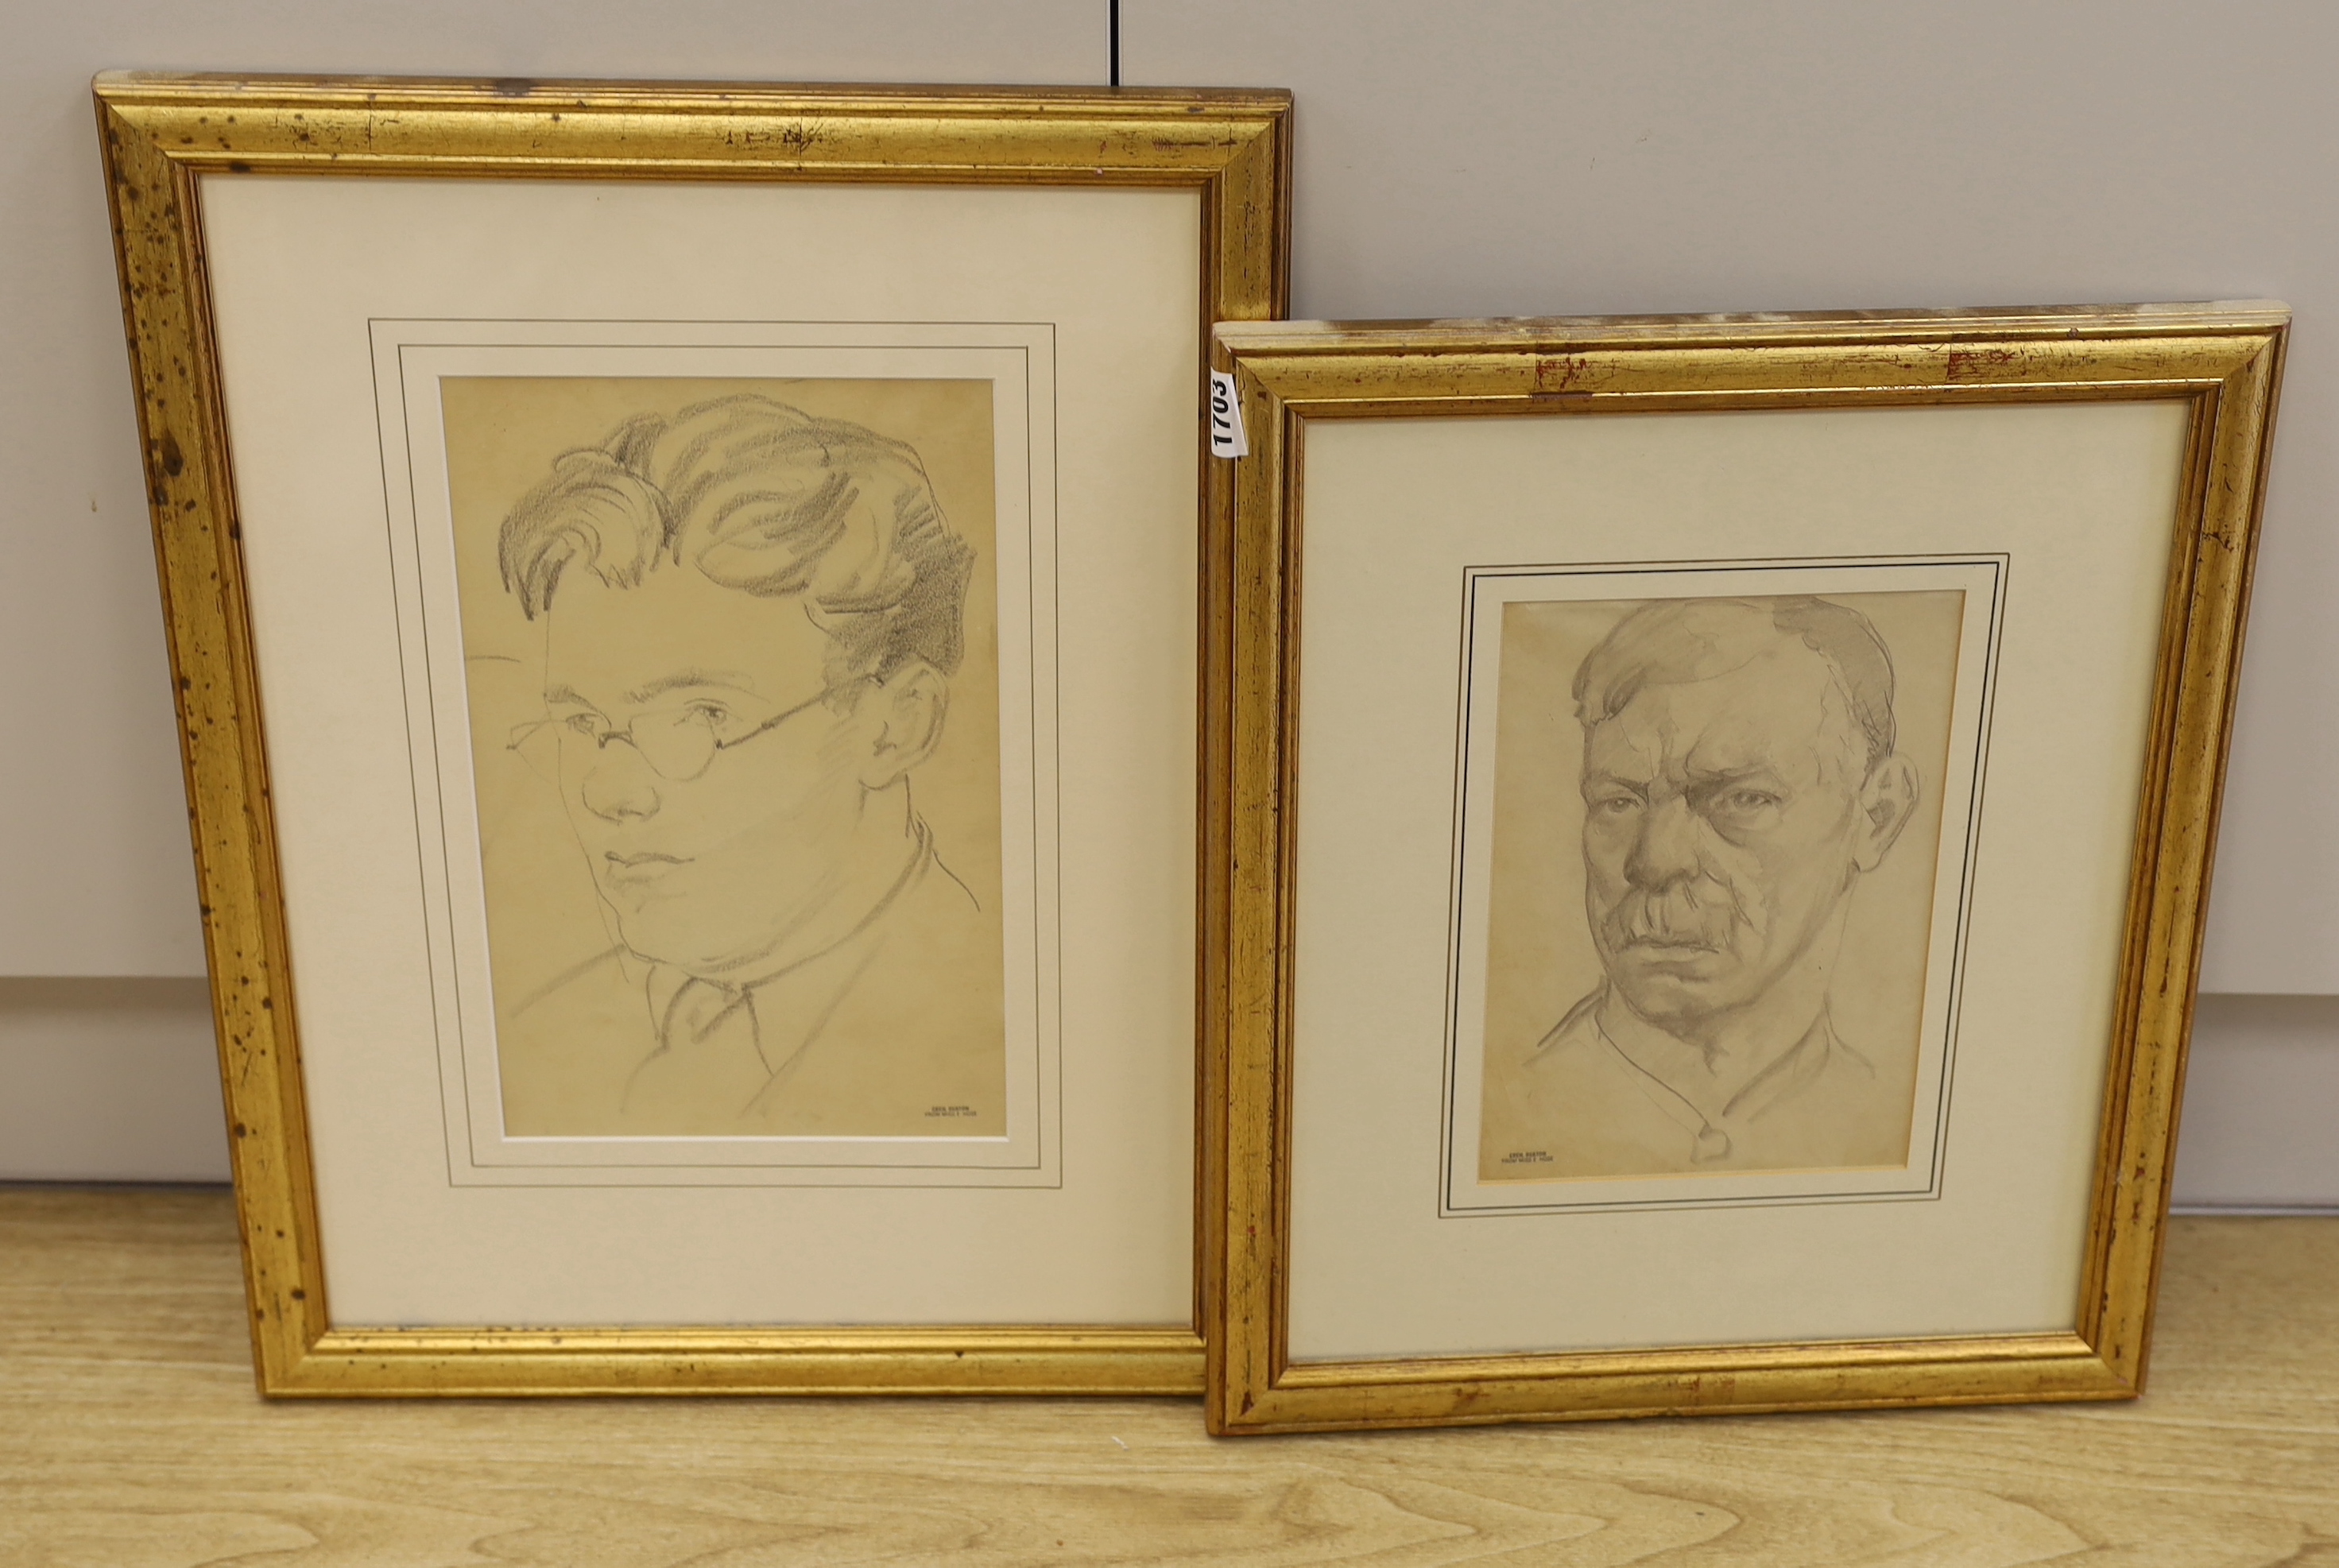 Sir Cecil Beaton (1904-1980), two pencil drawings, The actor Henry Sherwood and actor and impressario Sir Robert Stephens, both with Studio stamp, 25 x 17cm and 32 x 20cm